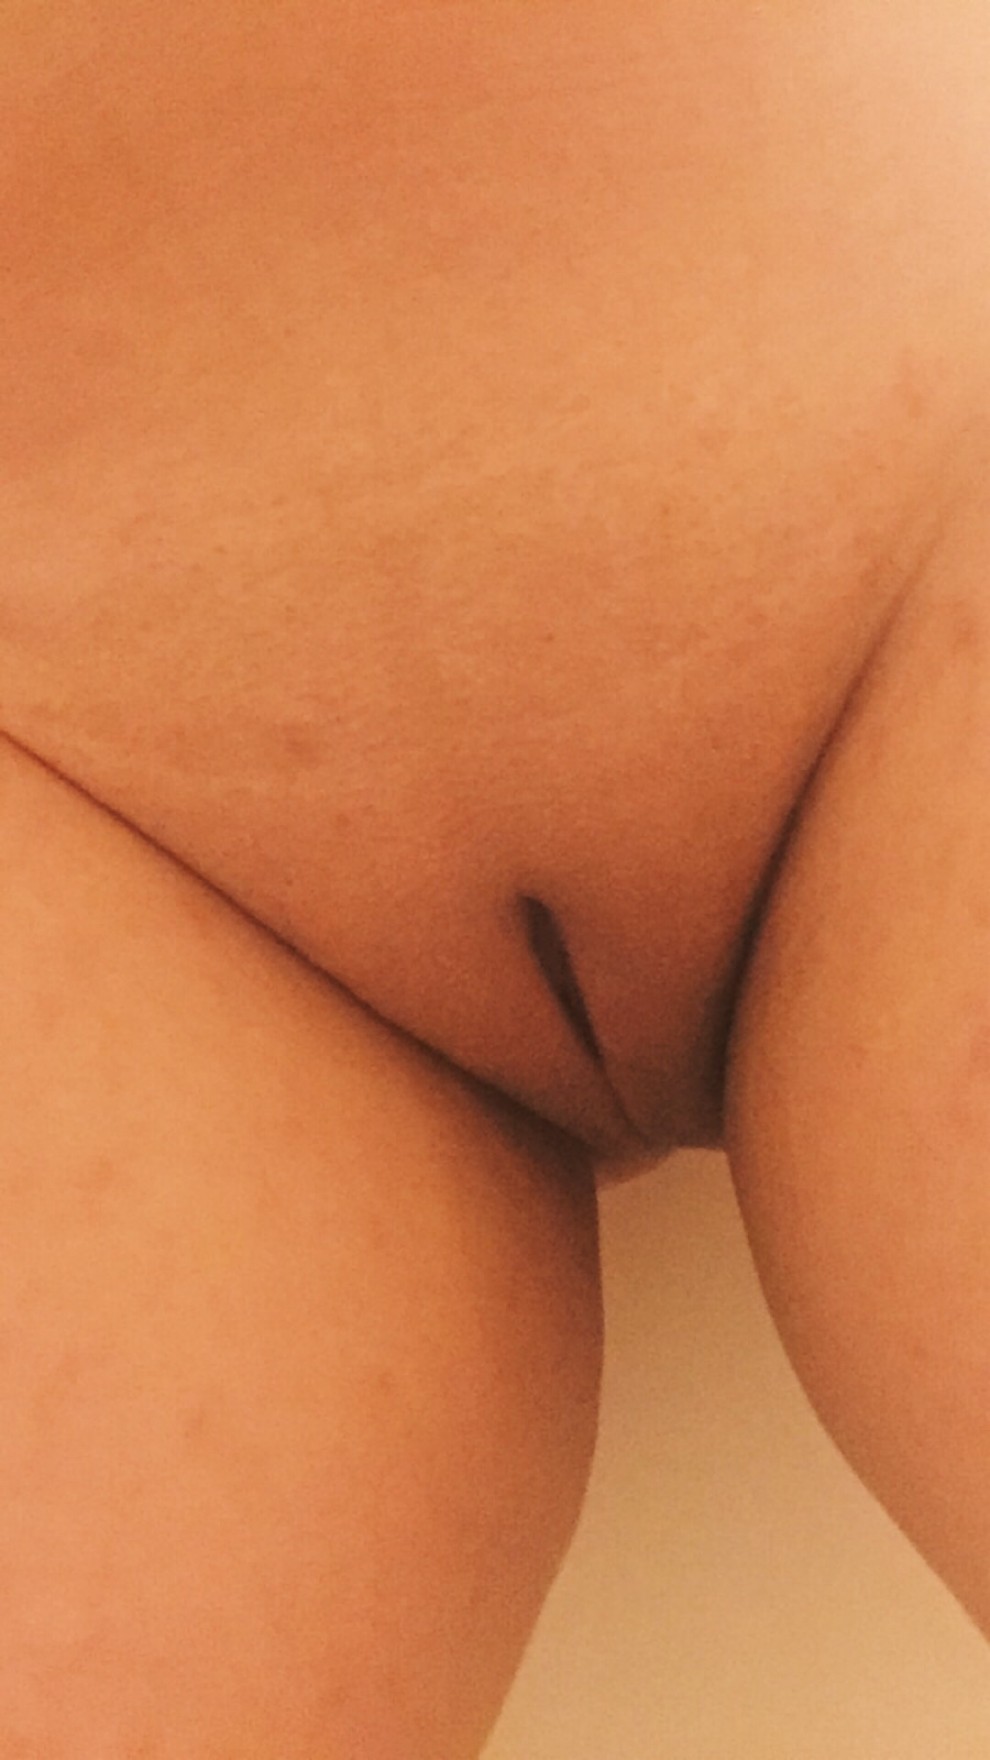 [f]i think my pussy is pretty cute... how about you? ;)